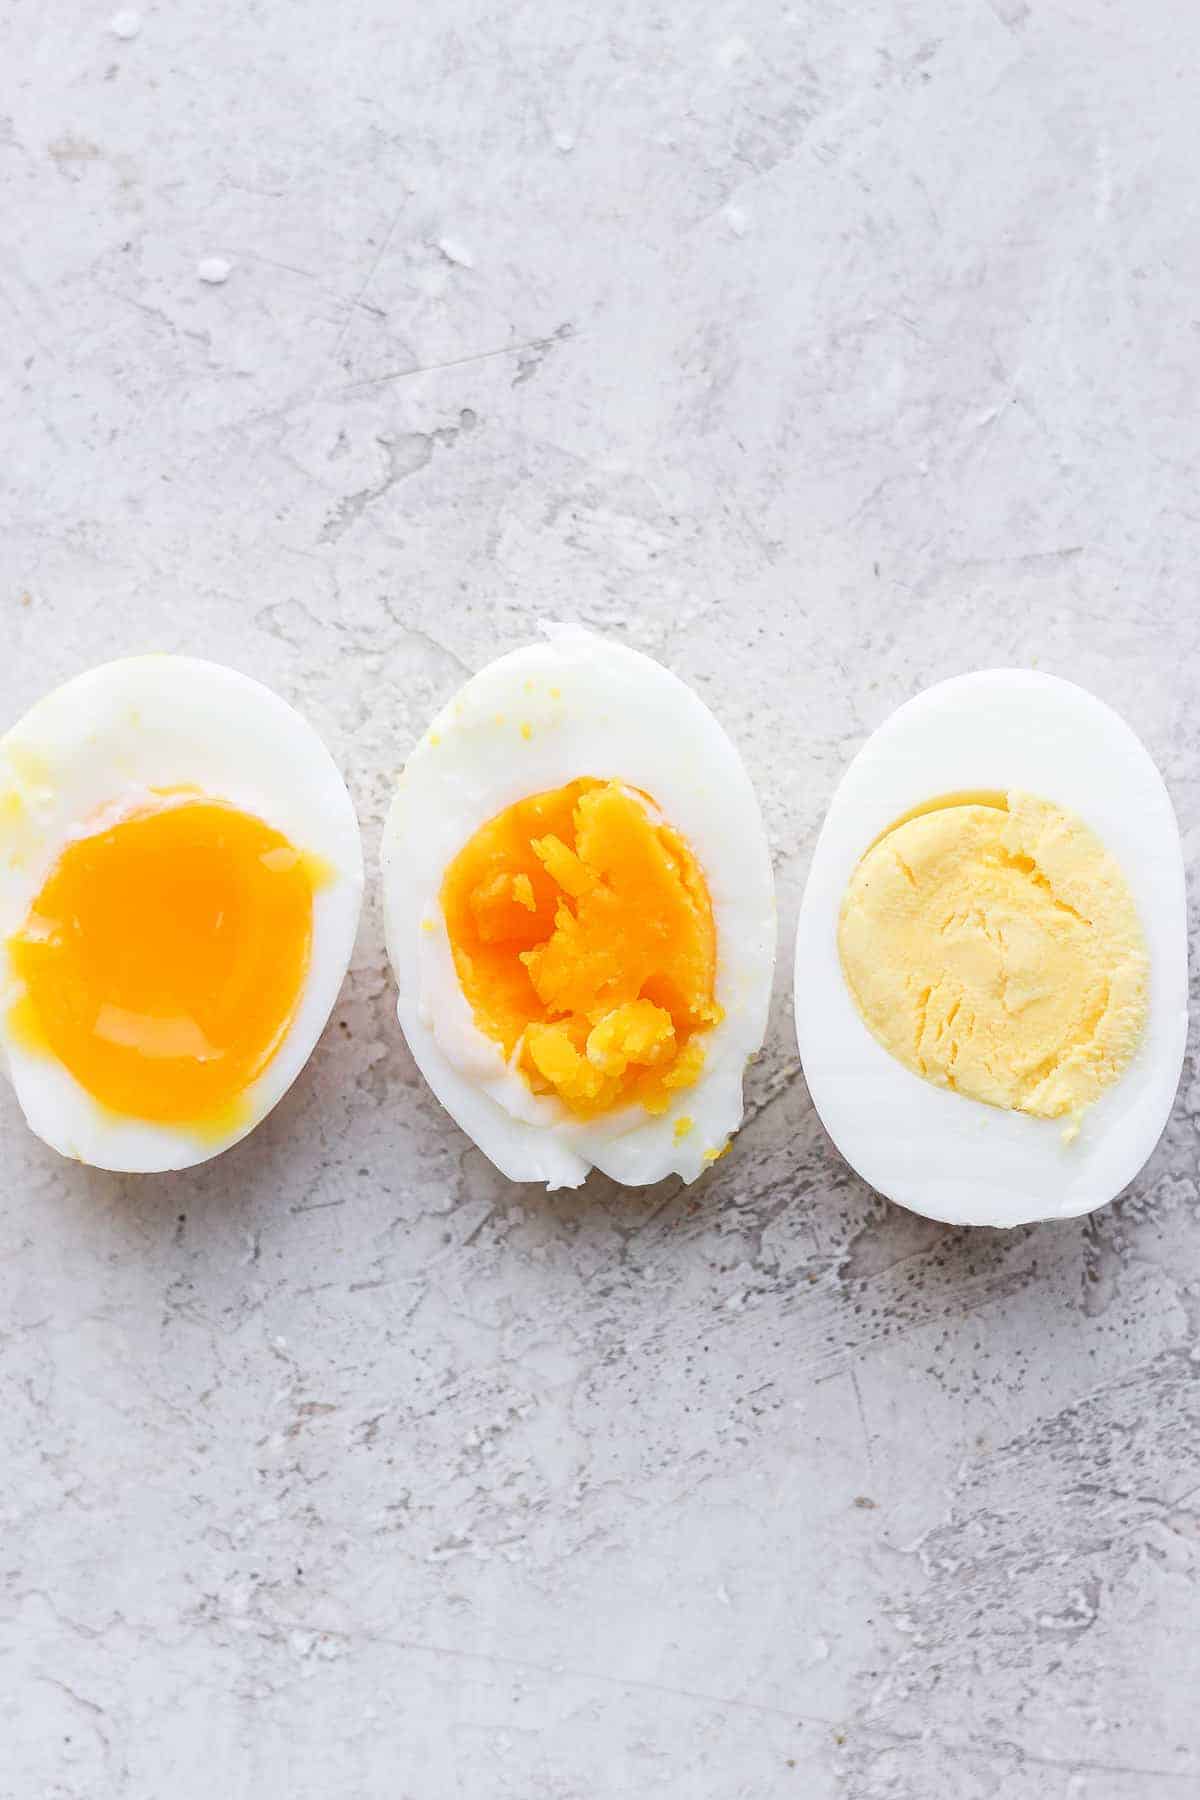 https://feelgoodfoodie.net/wp-content/uploads/2020/11/how-to-boil-eggs-12.jpg